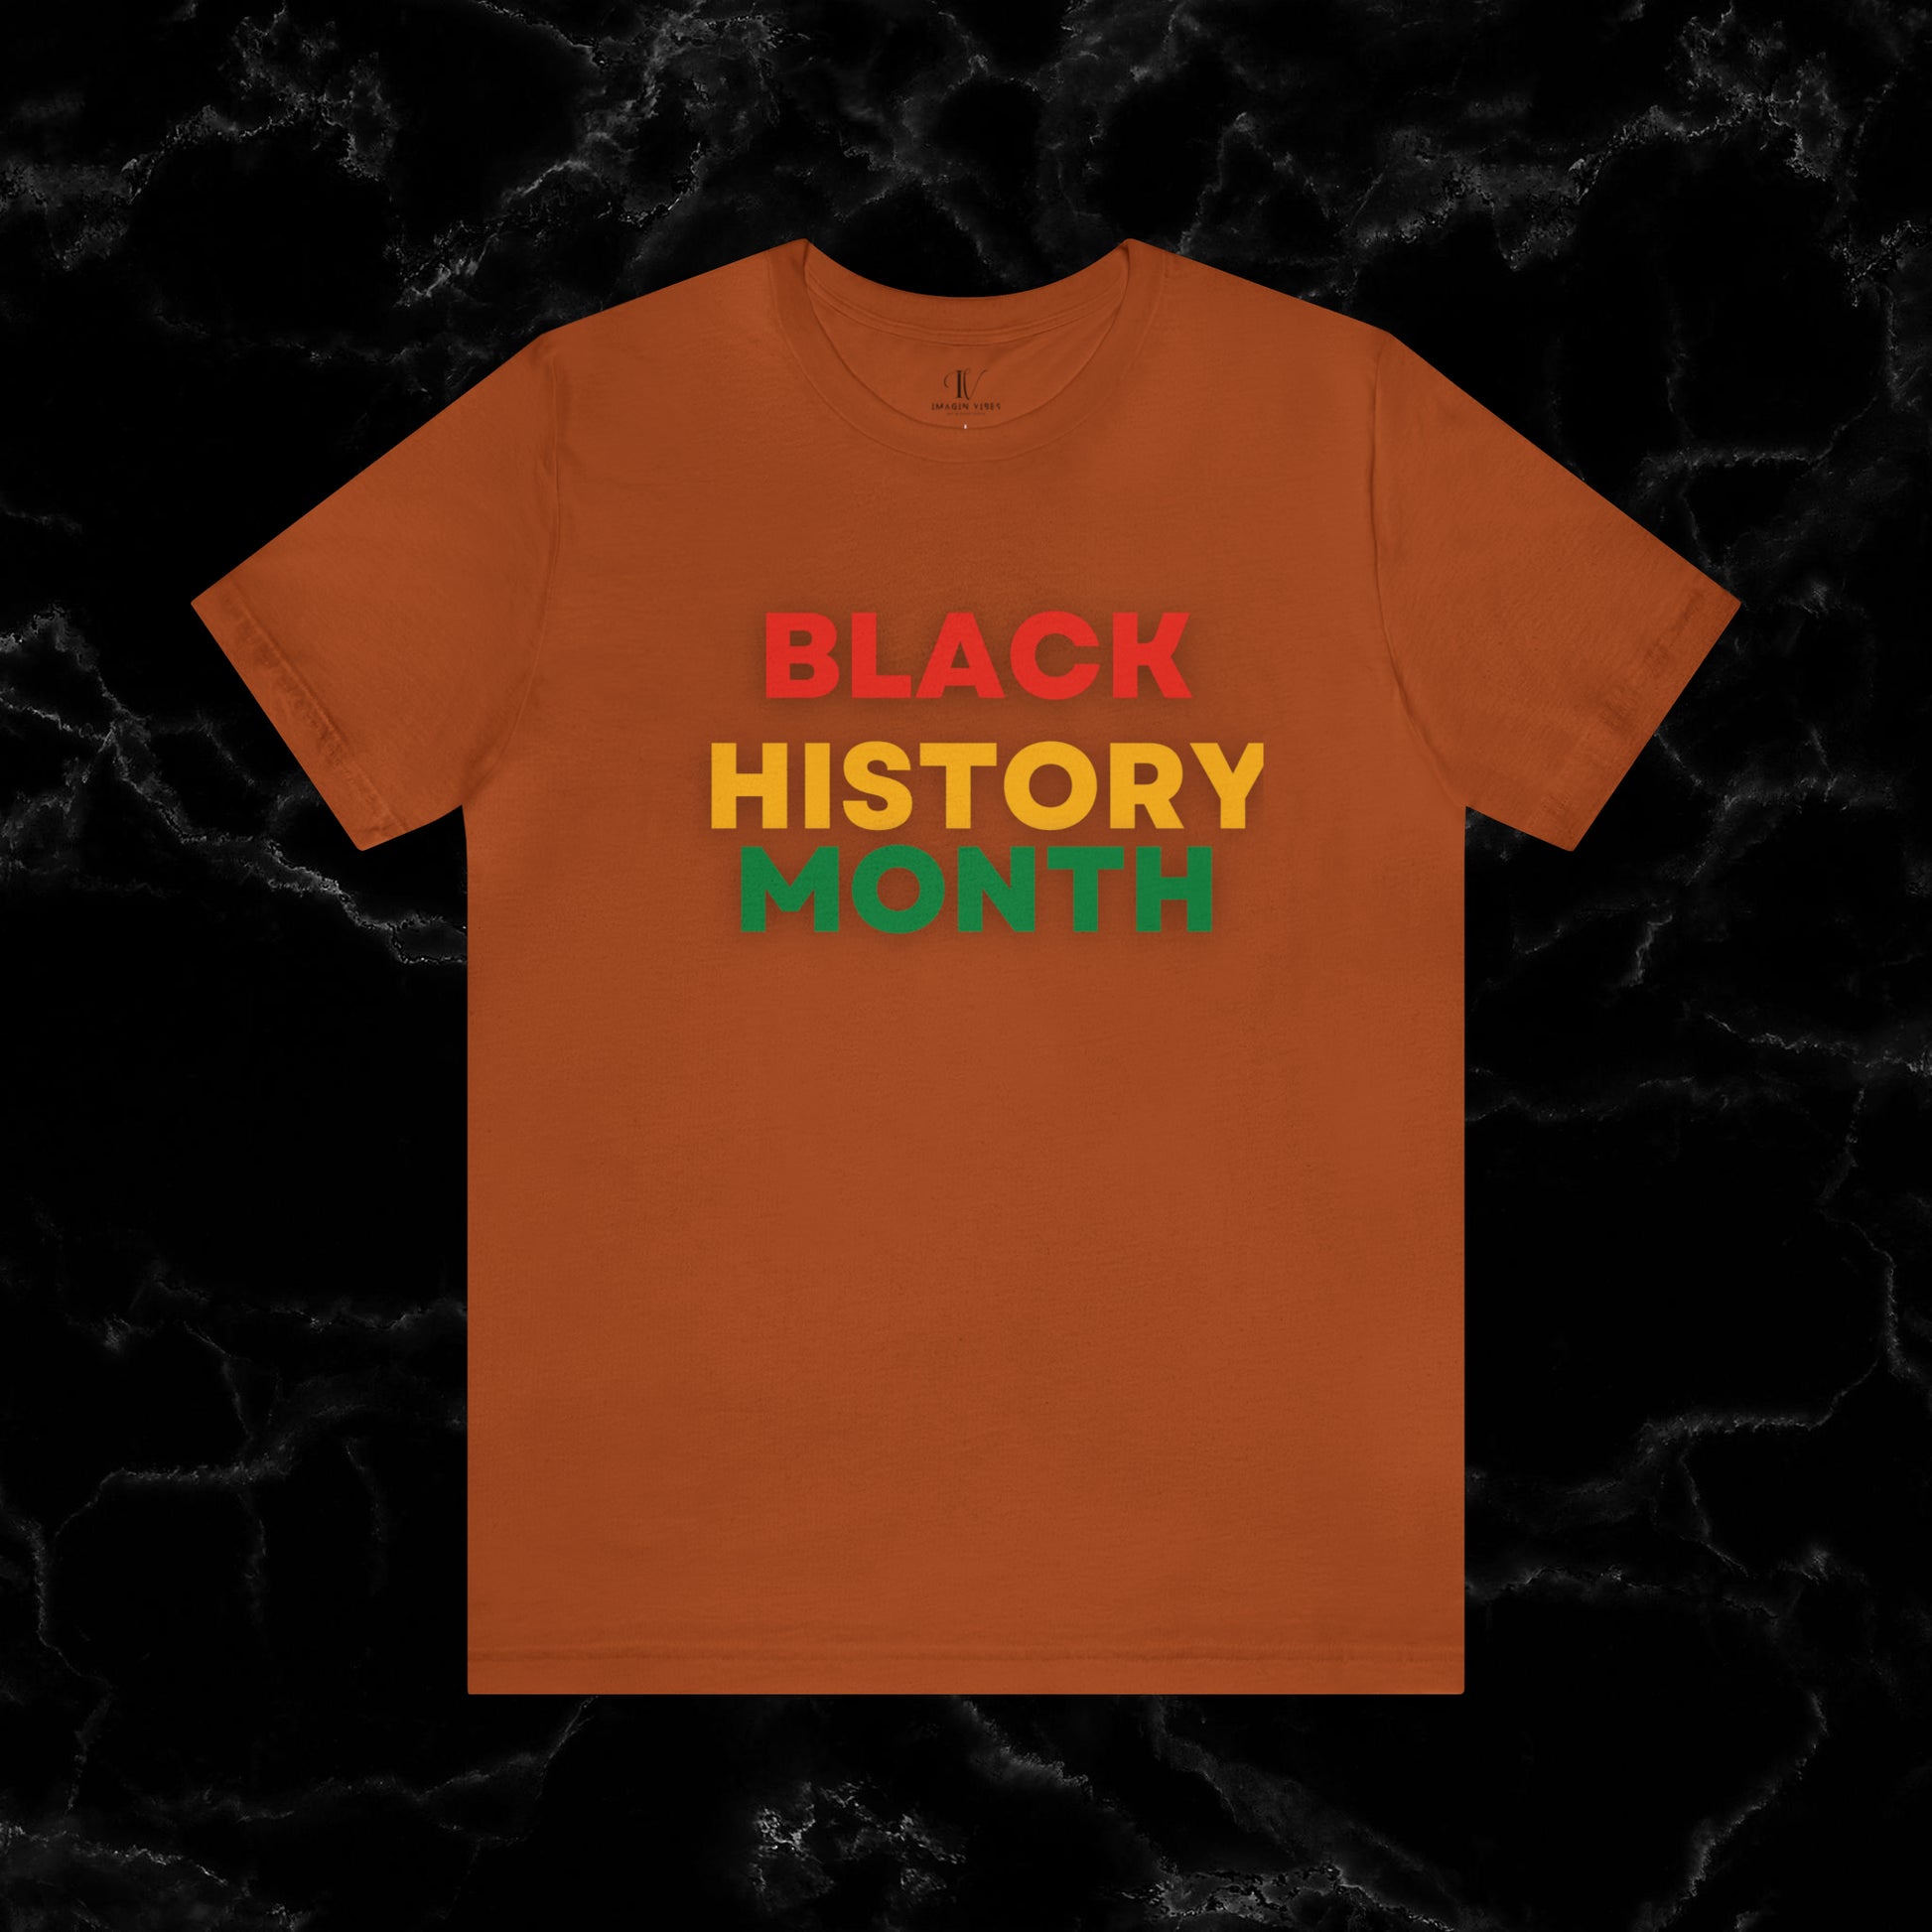 Trendy Black History Month Shirts Celebrating African American Pride and Heritage T-Shirt Autumn XS 